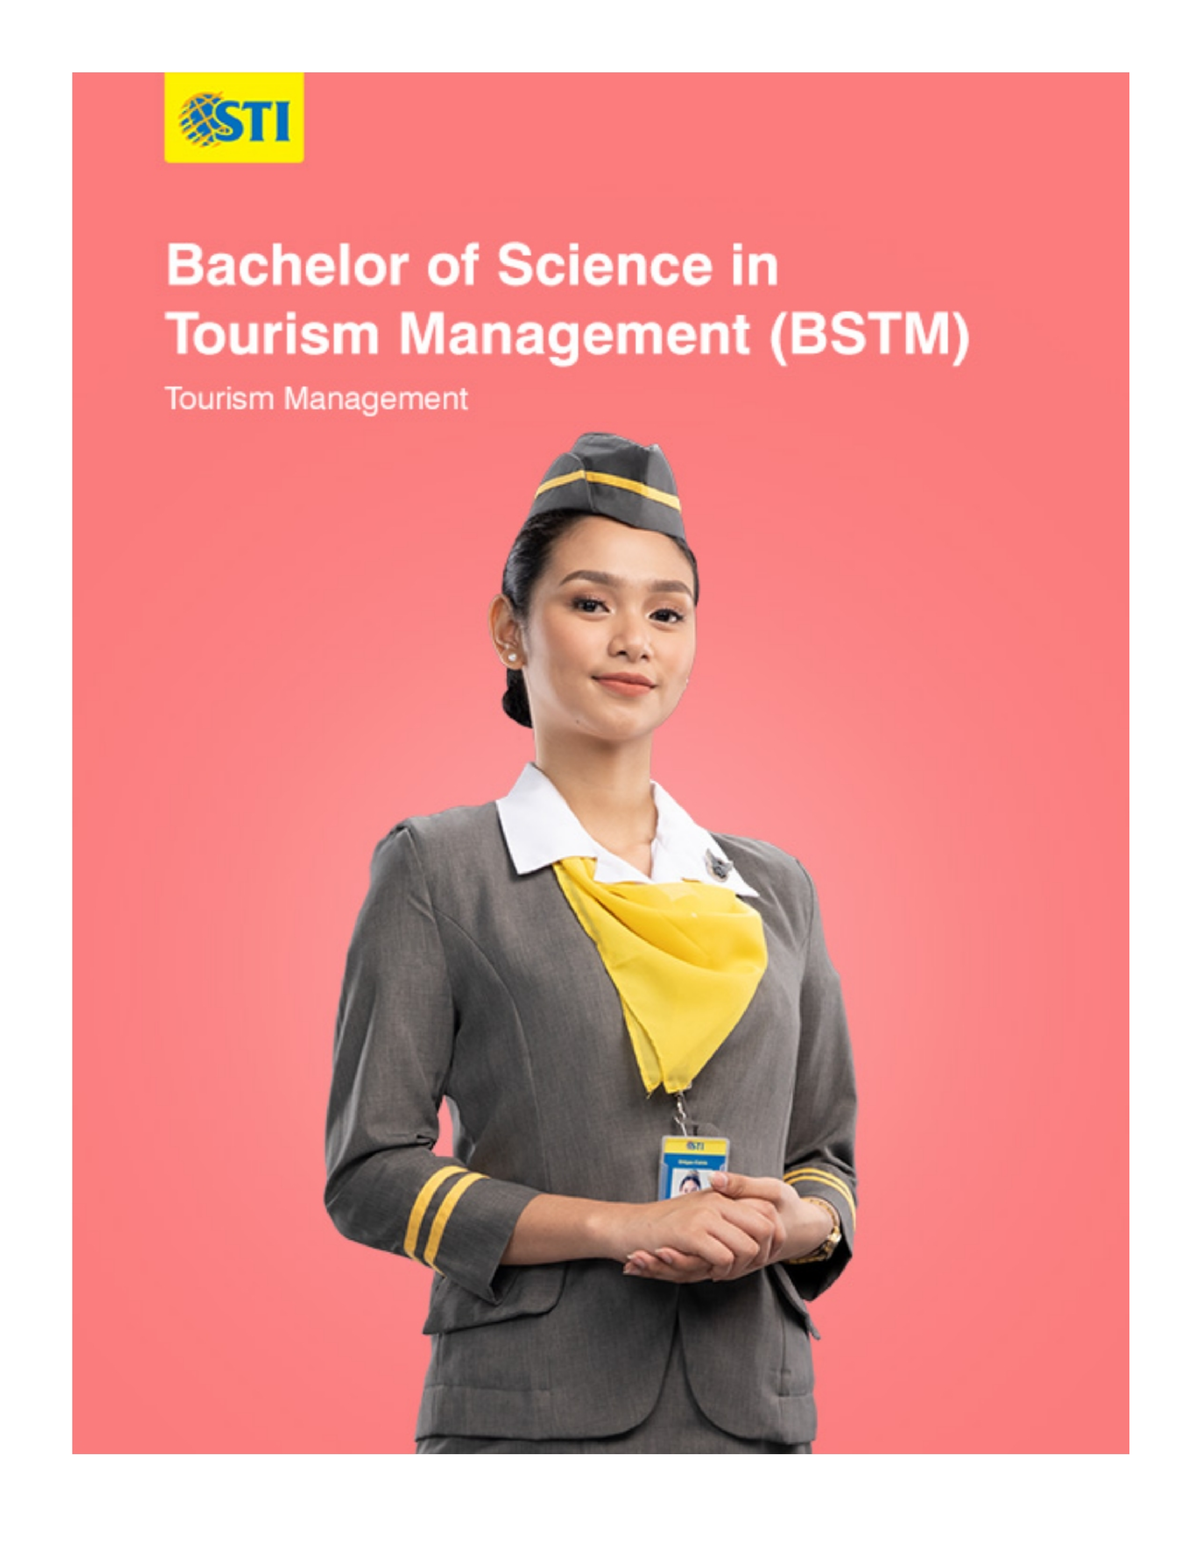 bs tourism management tuition fee sti